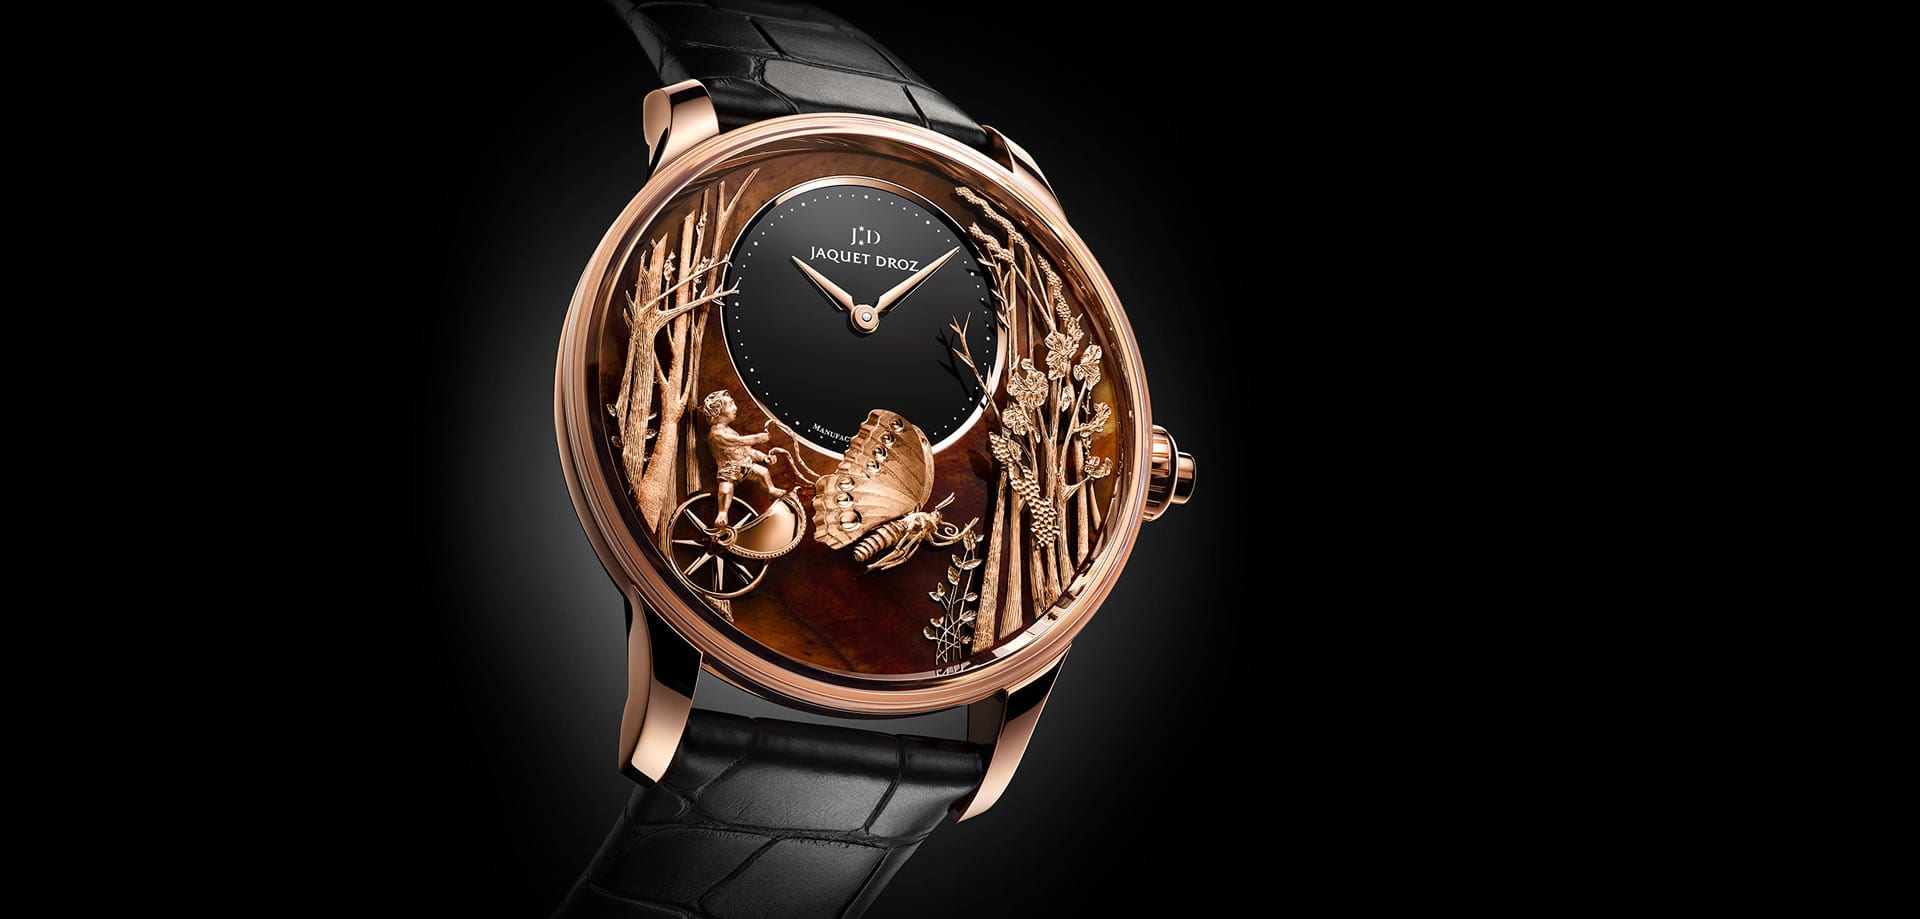 Introducing The New Jaquet Droz Loving Butterfly Automaton